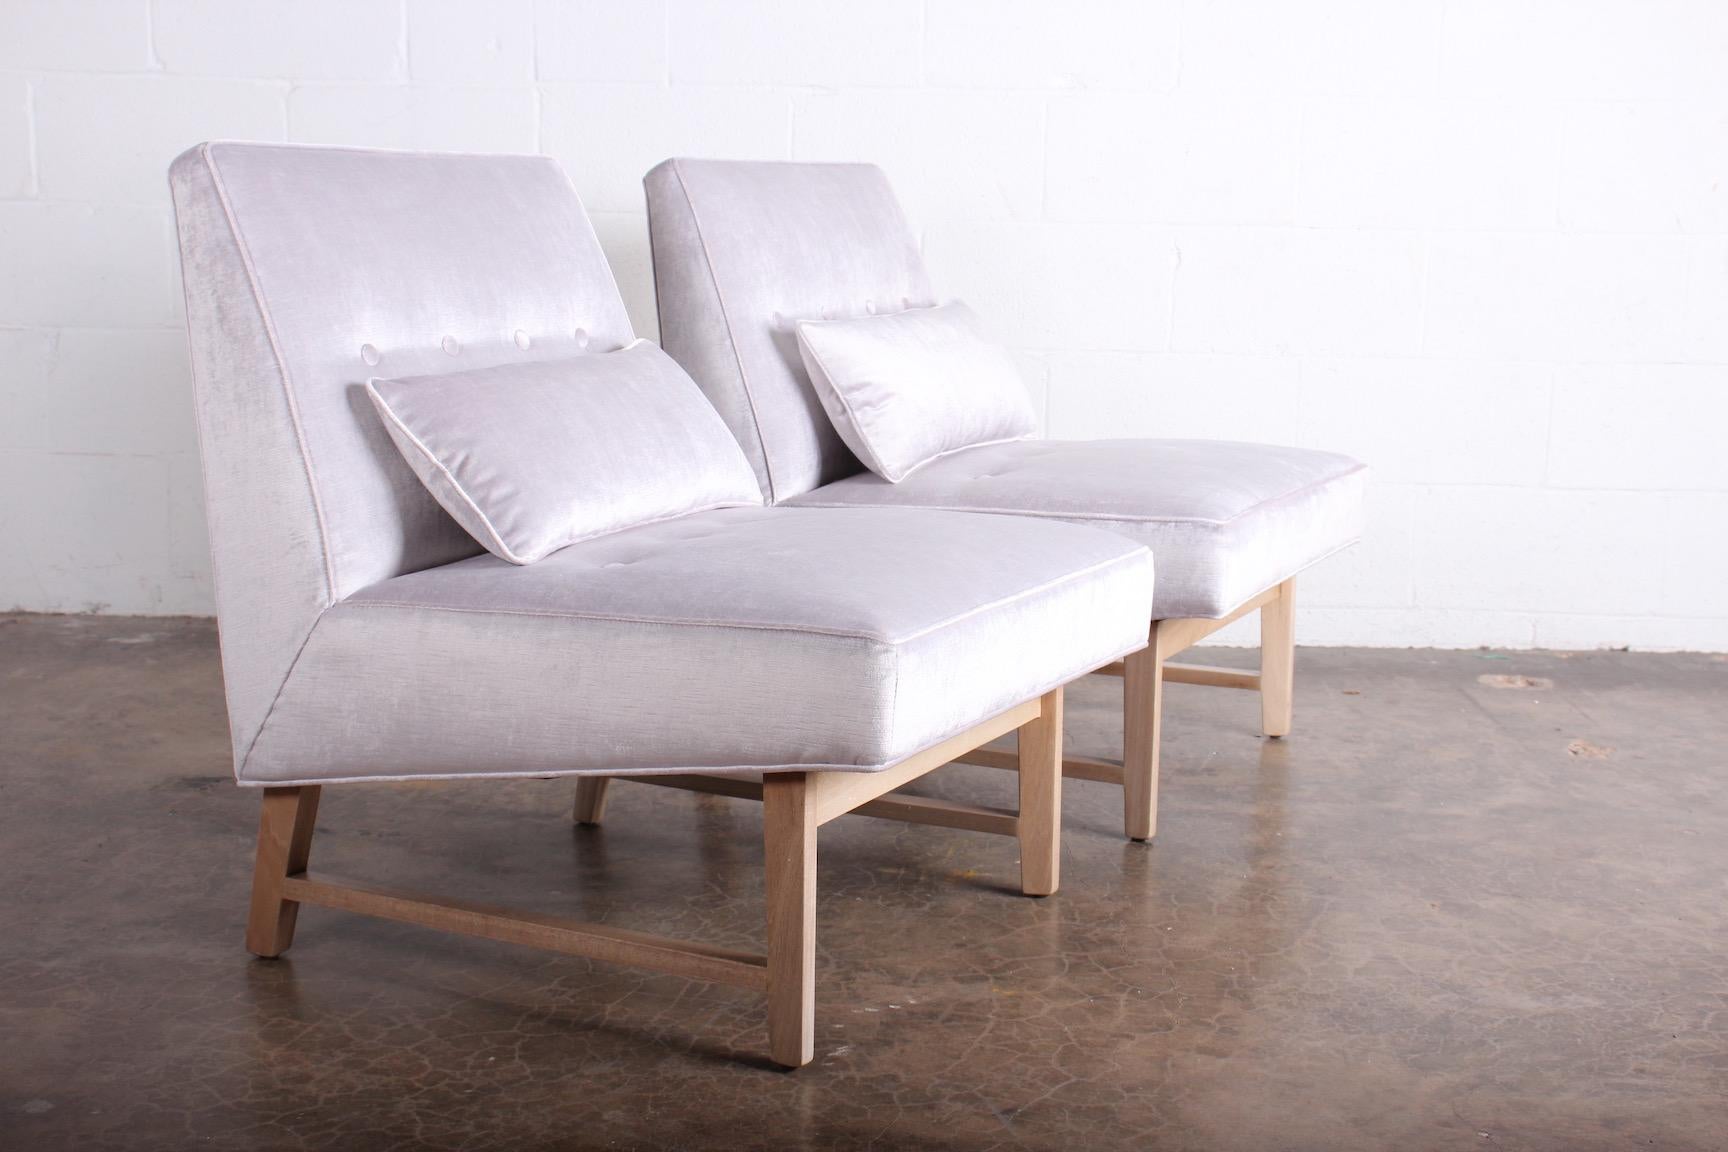 Pair of Slipper Chairs by Edward Wormley for Dunbar 3